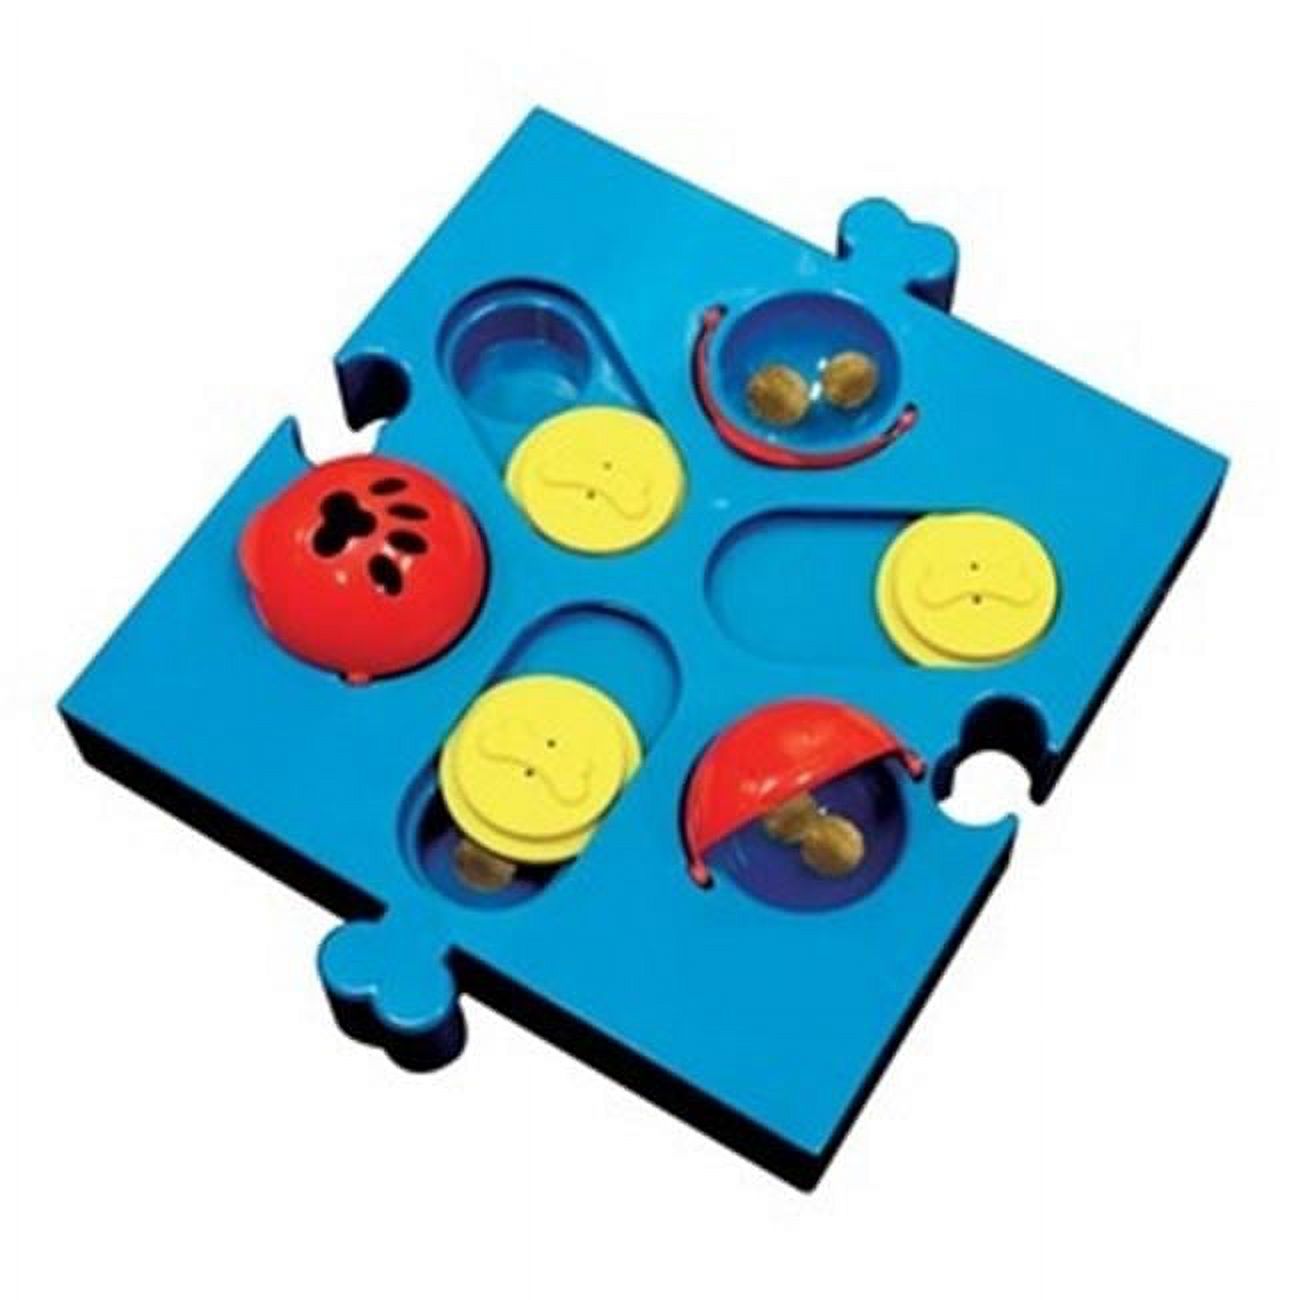 Spot Seek-A-Treat Flip 'N Slide Connector Puzzle Interactive Dog Treat and Toy Puzzle - image 1 of 2